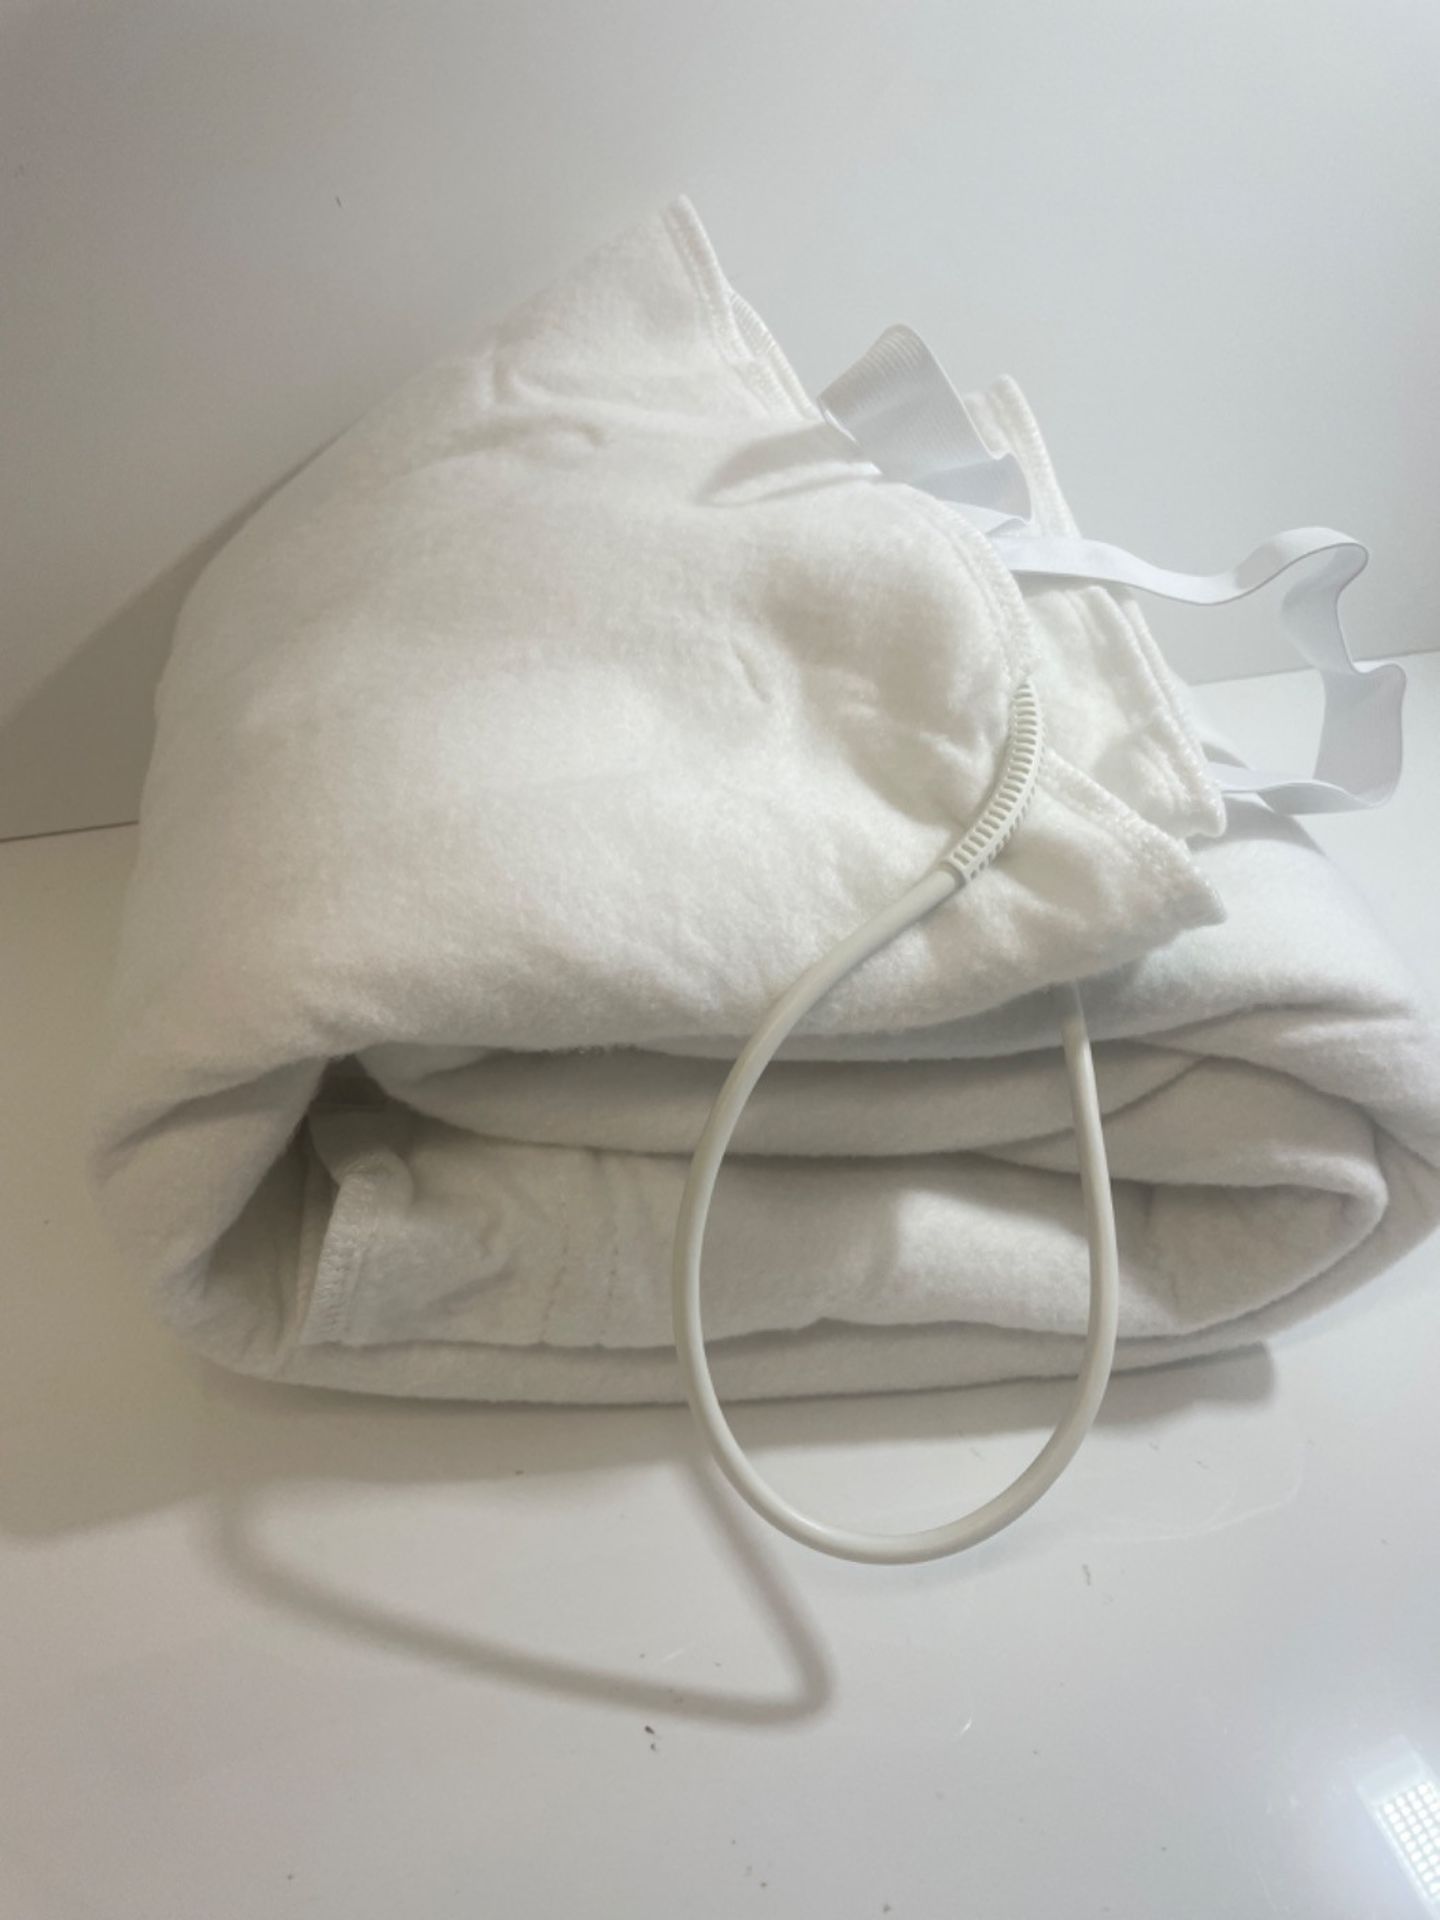 Silentnight Comfort Control Electric Blanket - Heated Electric Fitted Underblanket with 3 Heat Sett - Image 3 of 3